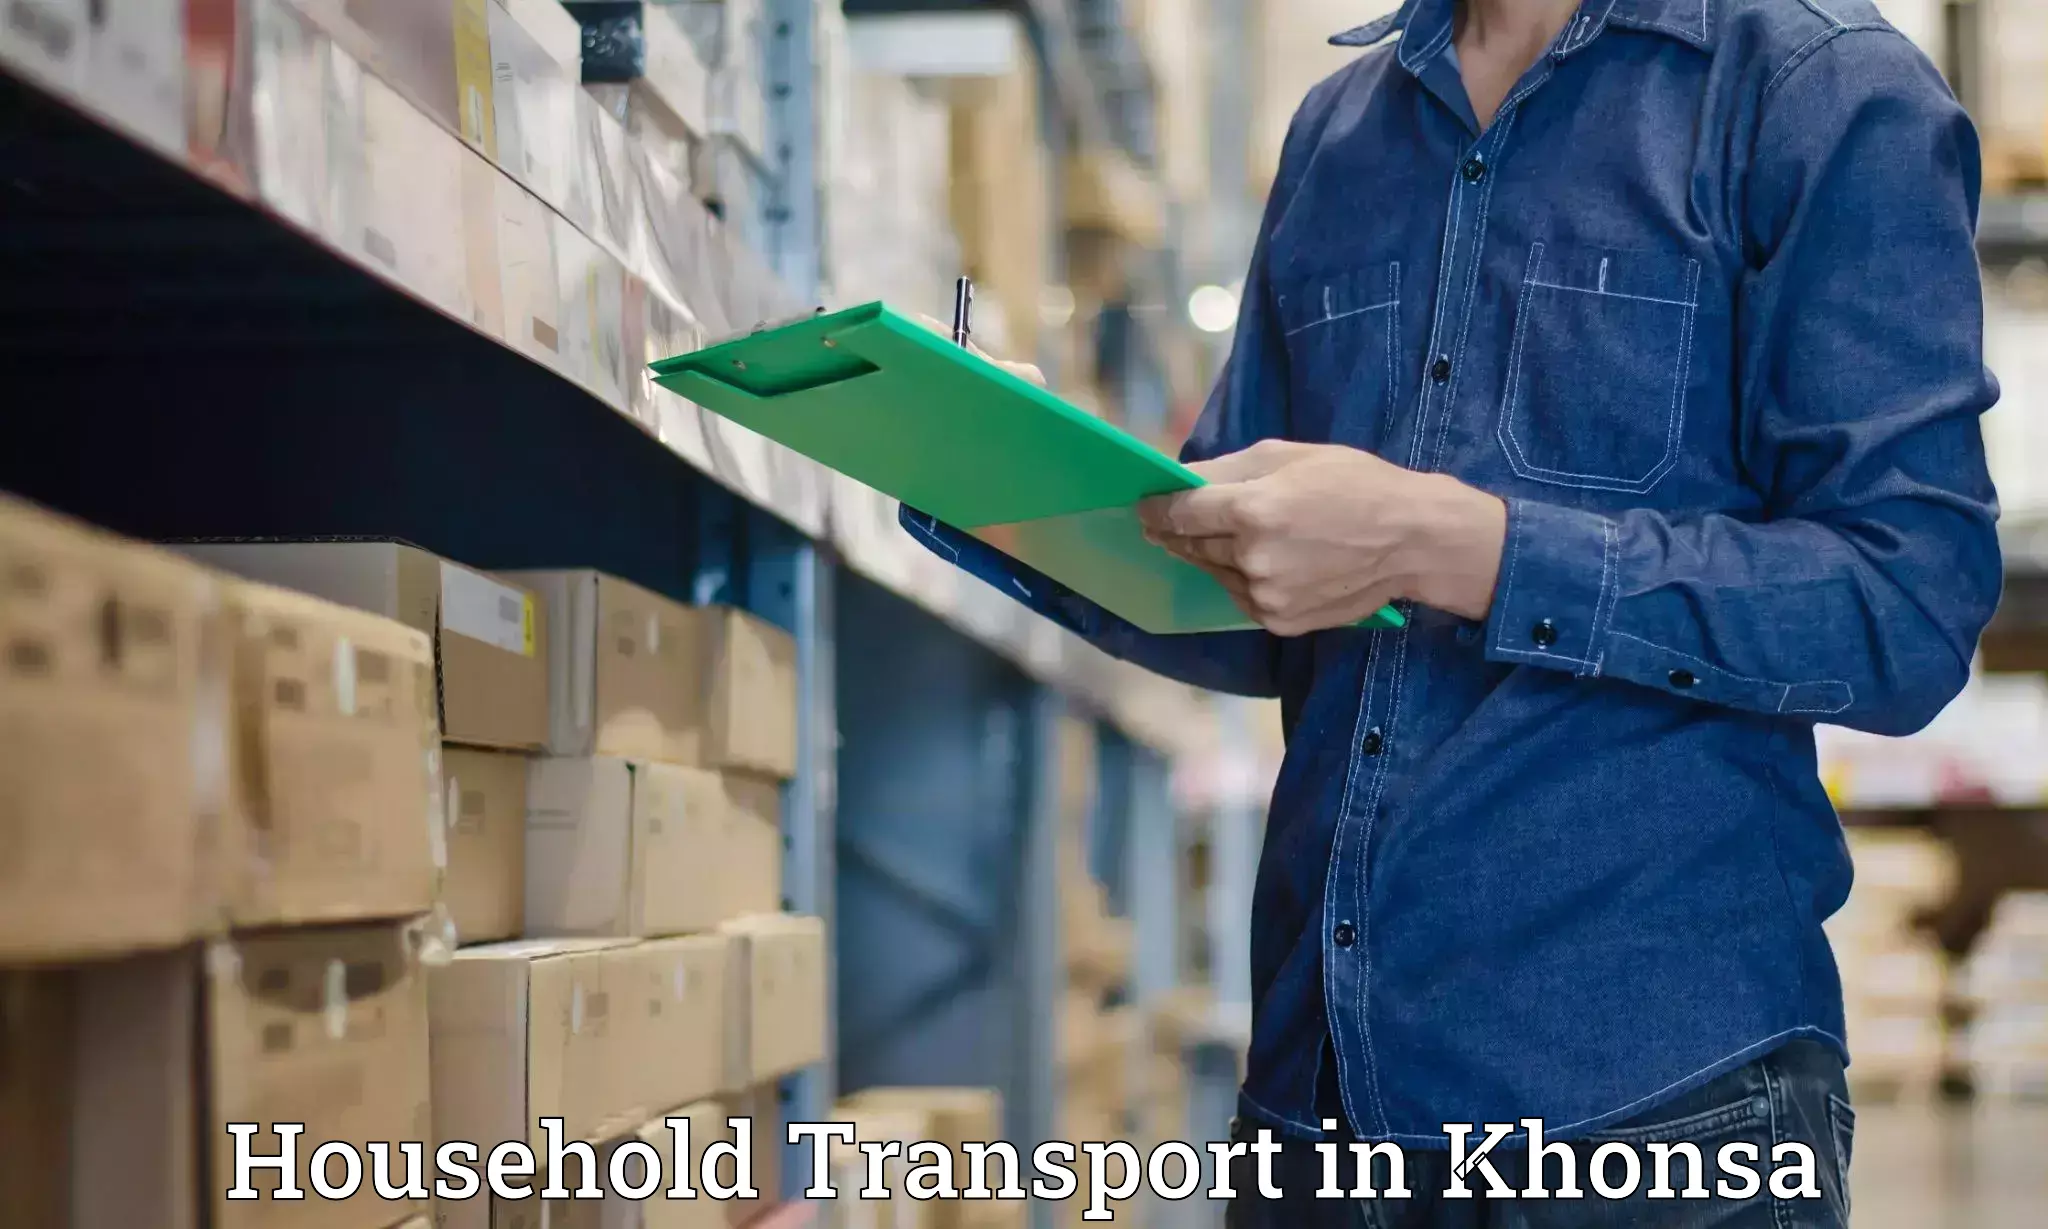 Reliable furniture transport in Khonsa